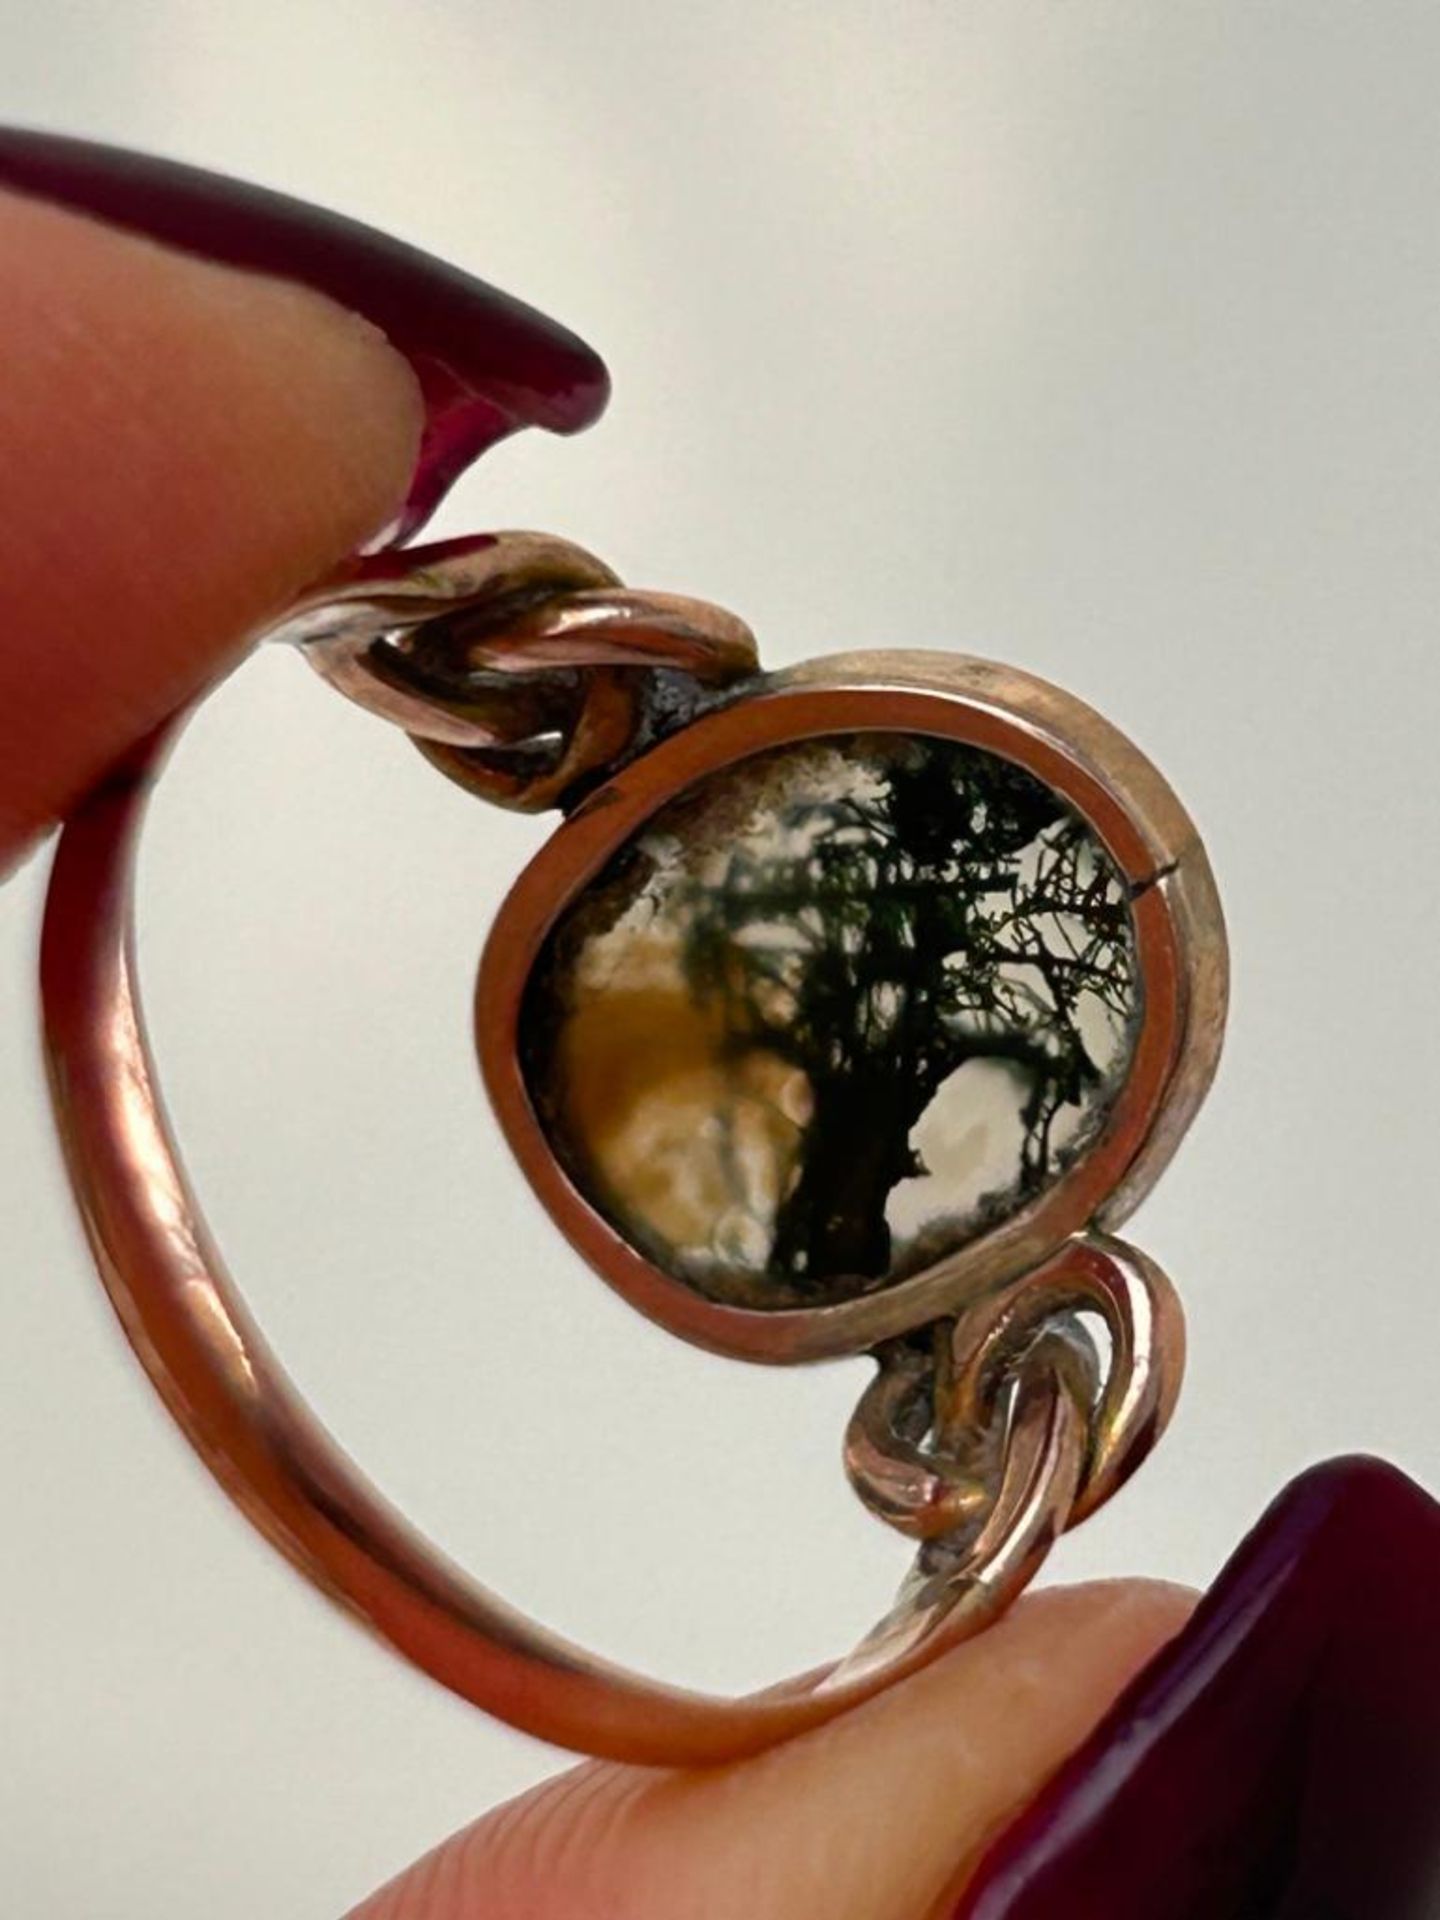 Antique Moss Agate 9ct Gold Ring with Lovers Knot Shoulder Details - Image 3 of 6